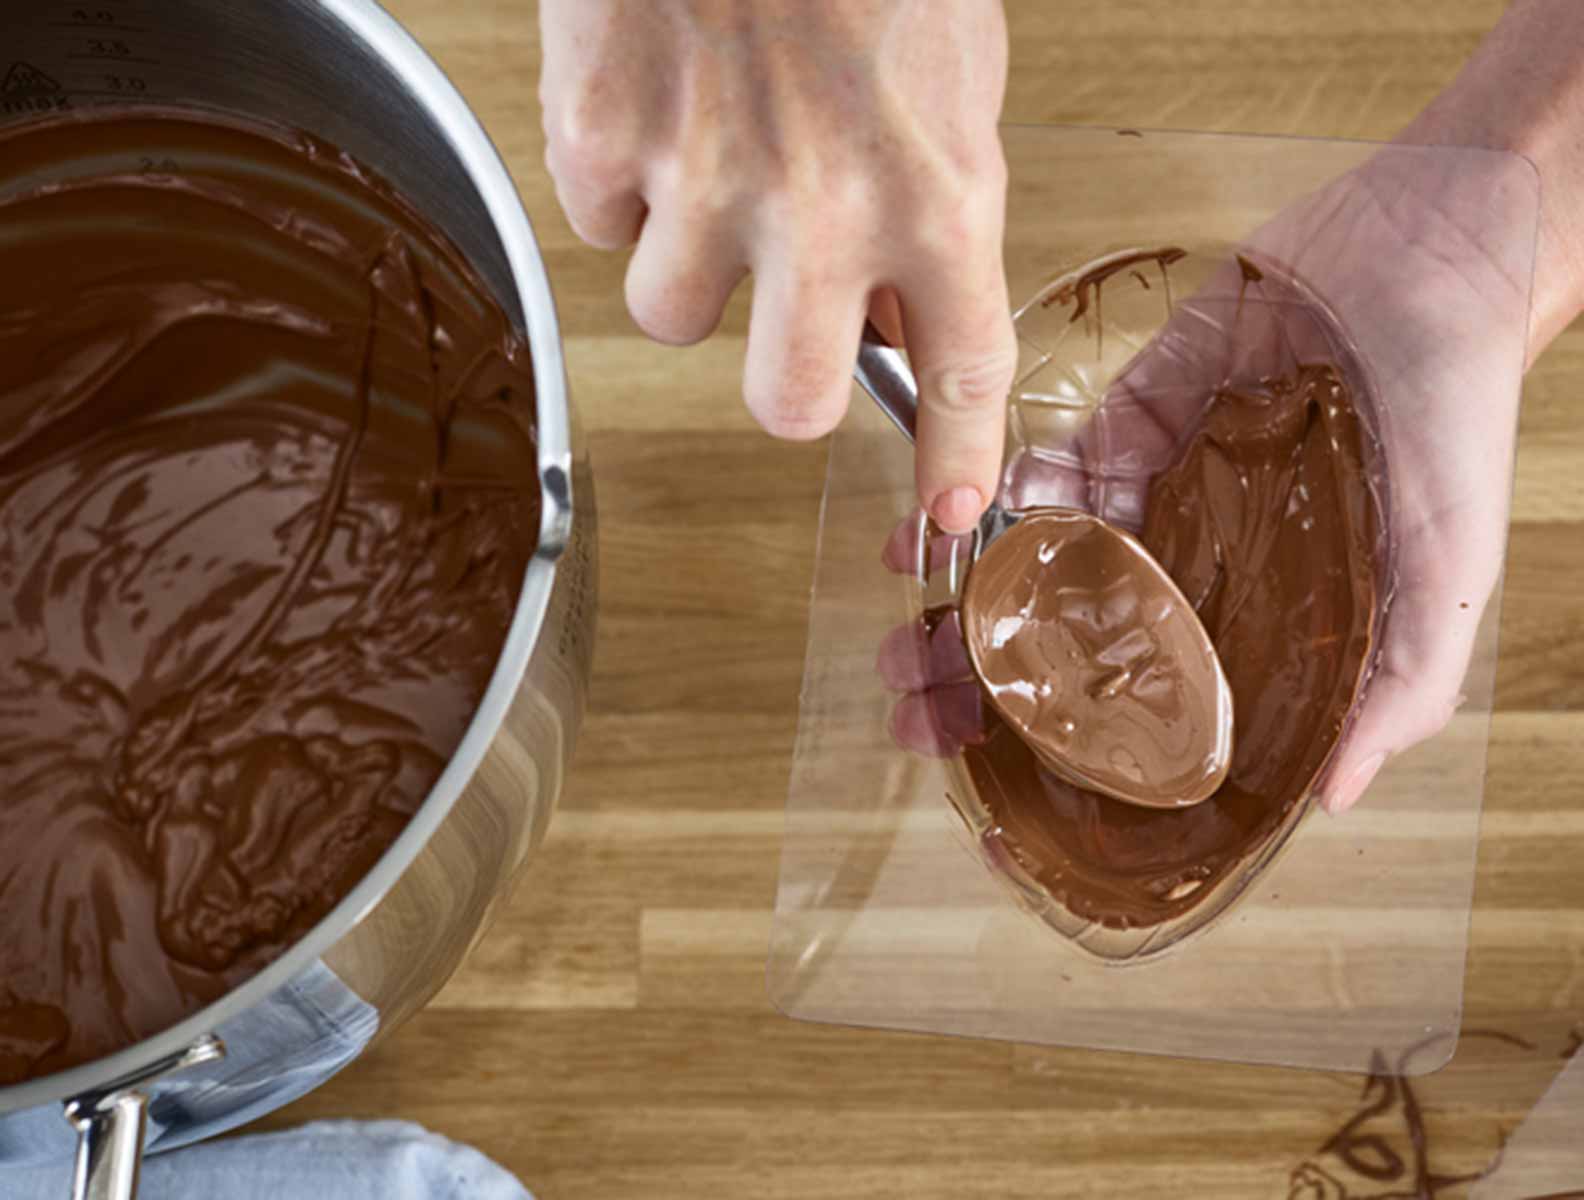 KW-Article-Melting-and-tempering-chocolate-1584x1200.jpg